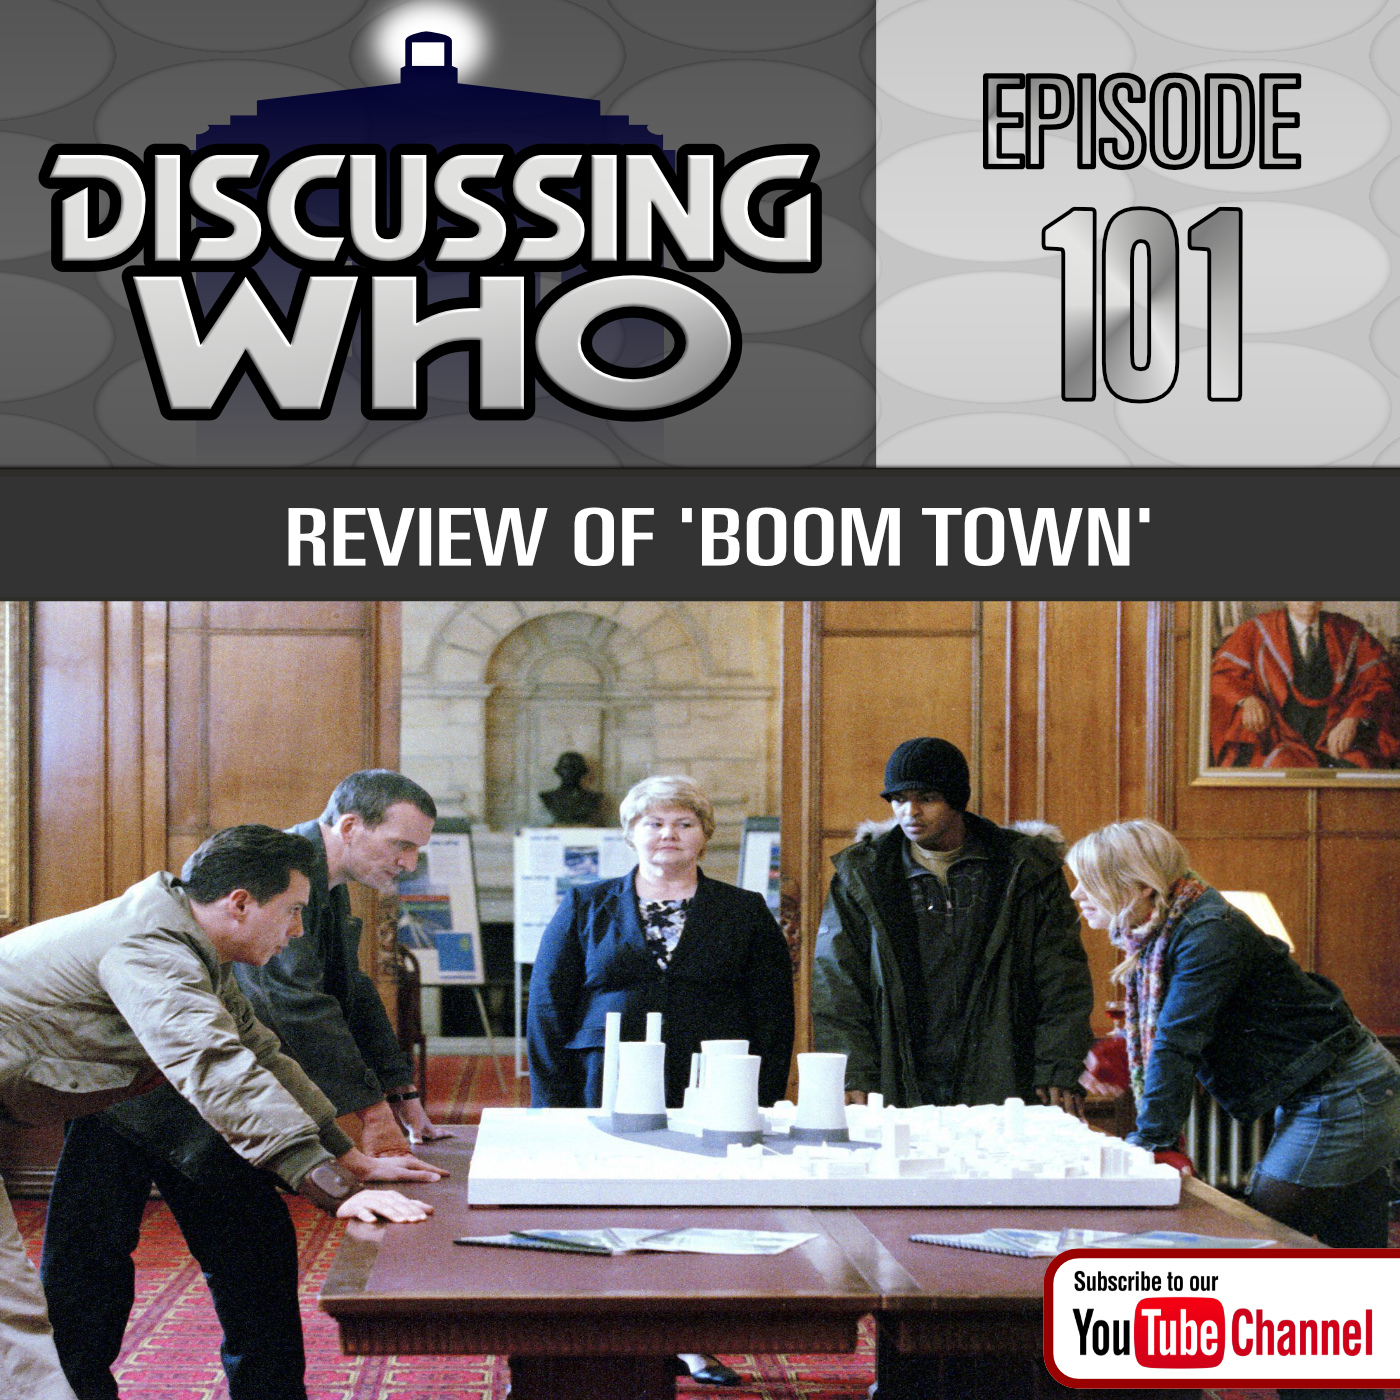 Review of Boom Town, Discussing Who